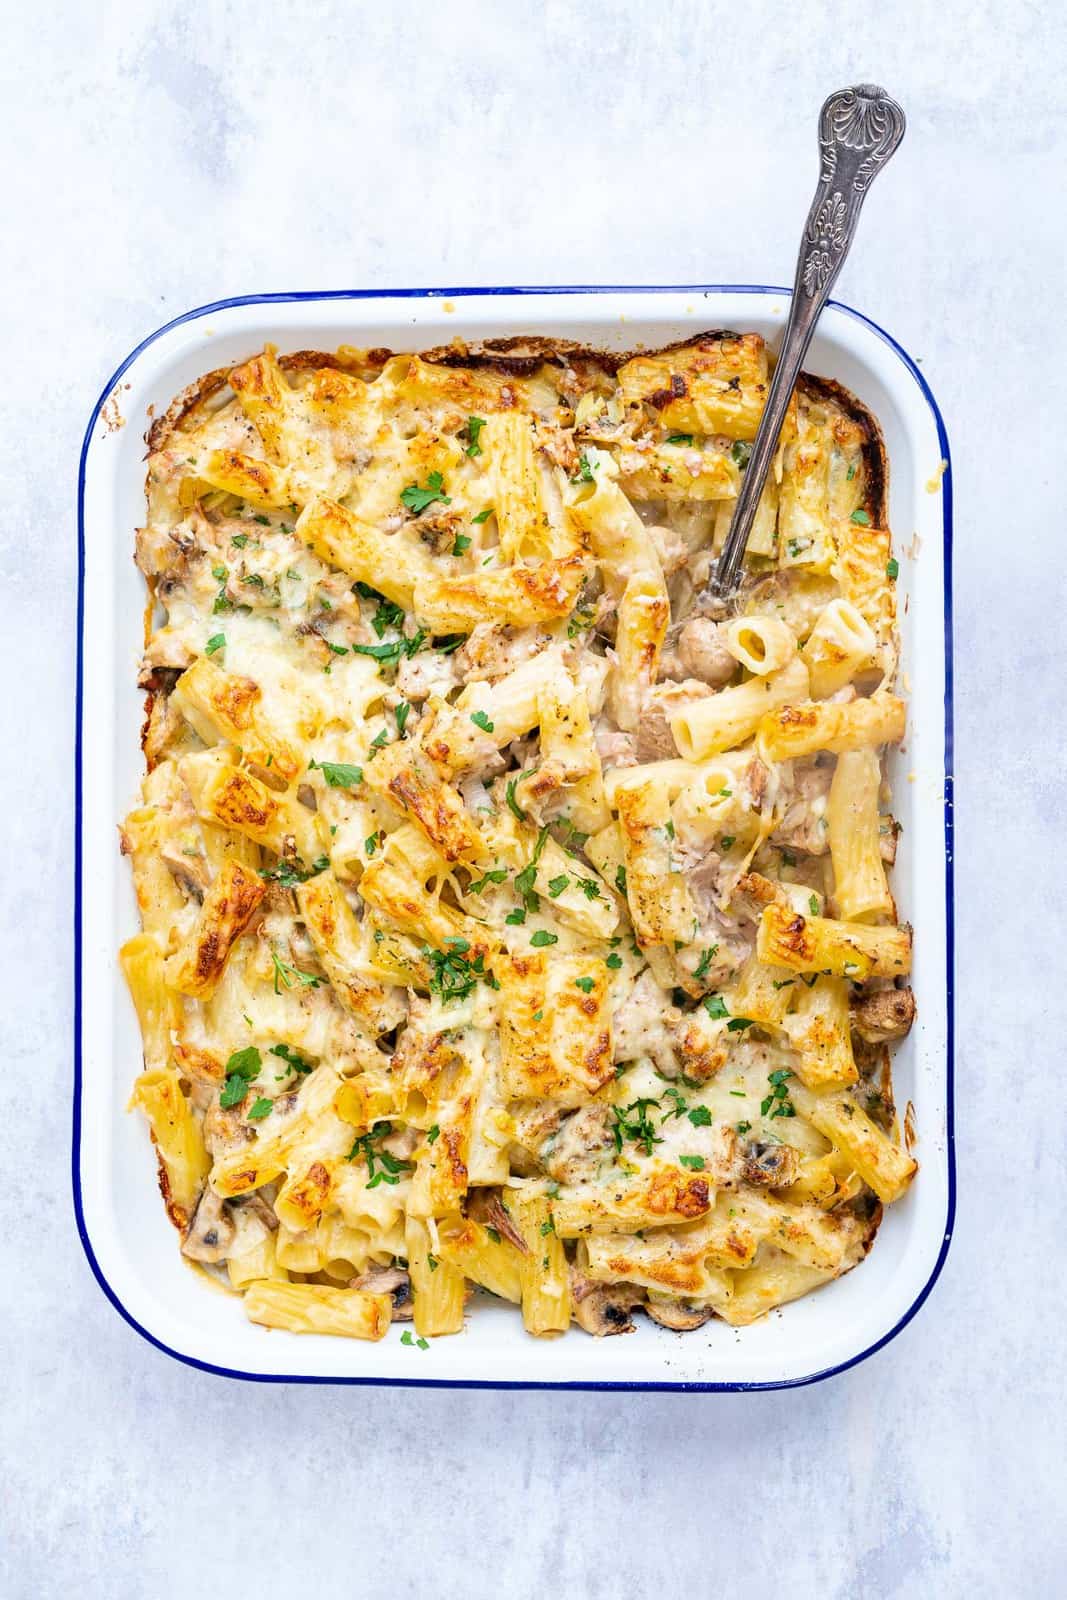 Cheesy tuna paste bake in a roasting dish garnished with chopped parsley